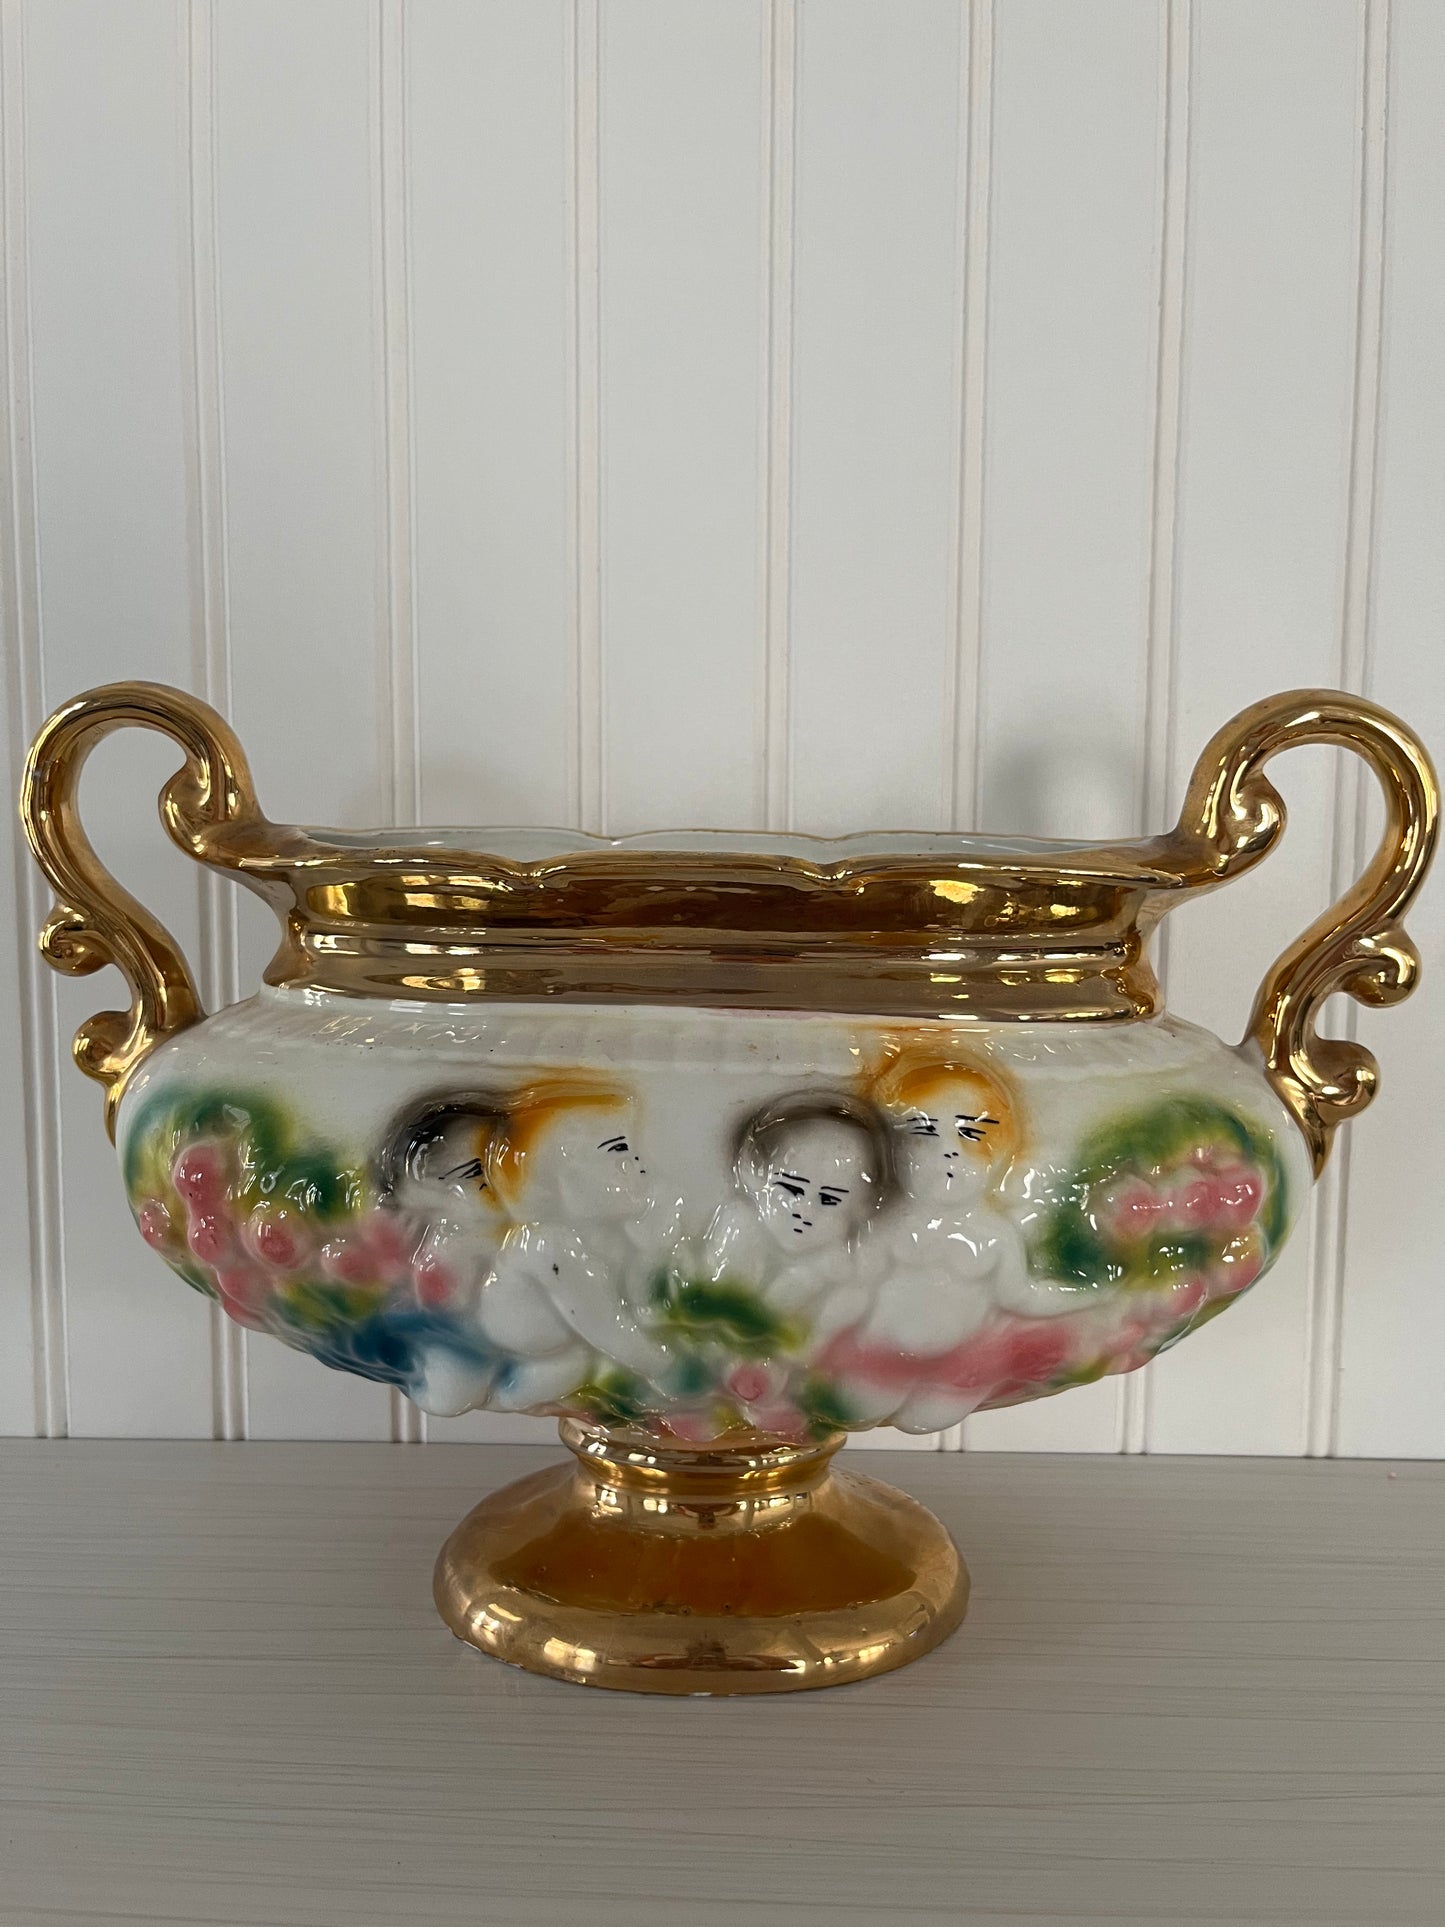 Quirky Neo-Baroque Gold Accented Double Handled Ugly Cherubs Tureen/Urn Pedestal Vase